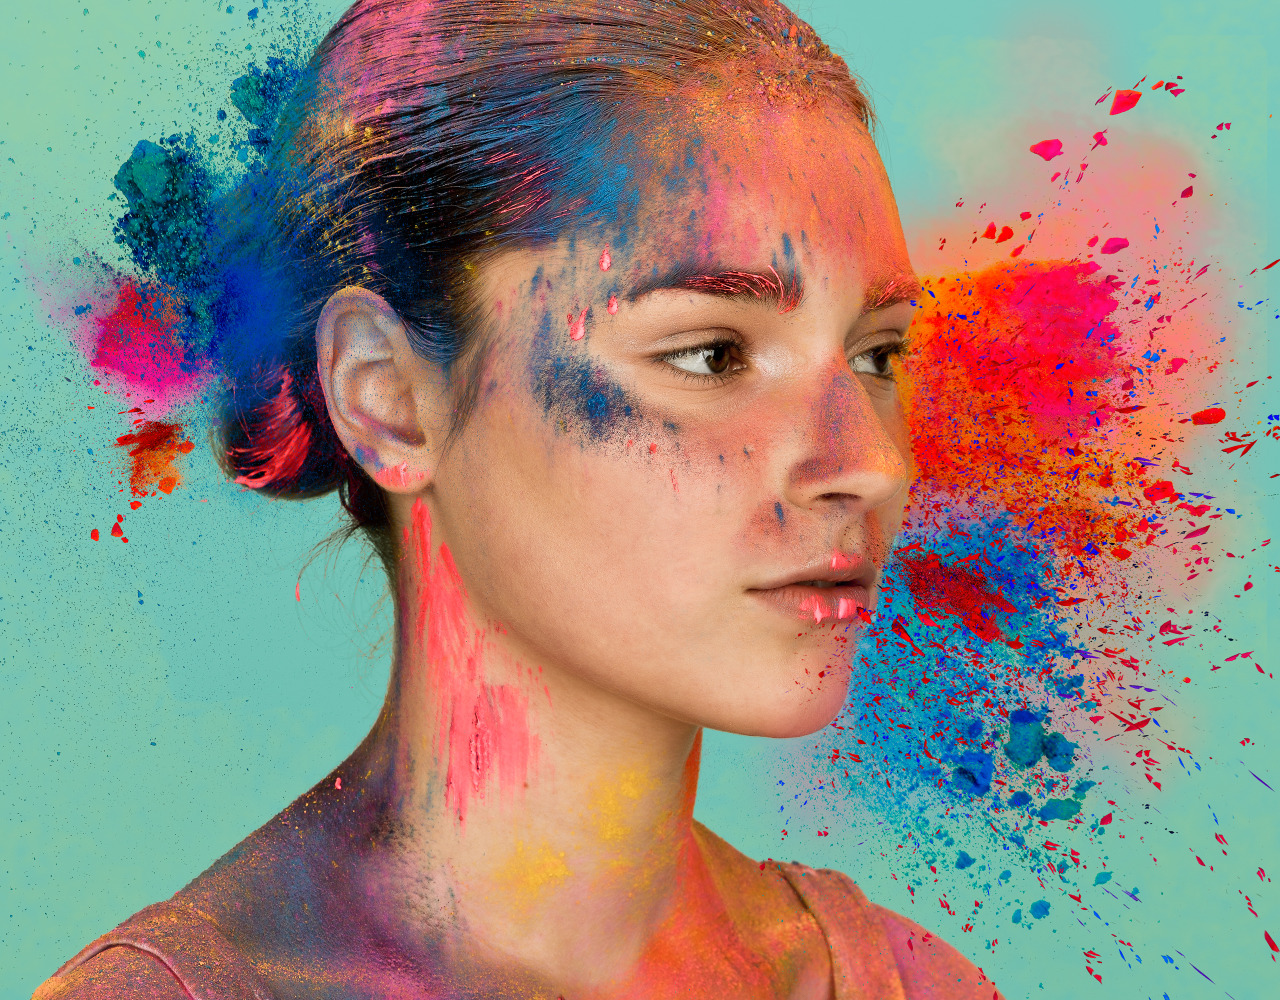 “Really Crazy Colors” by fashion photographer Per Zennstrom and make-up artist linda Sundqvist.